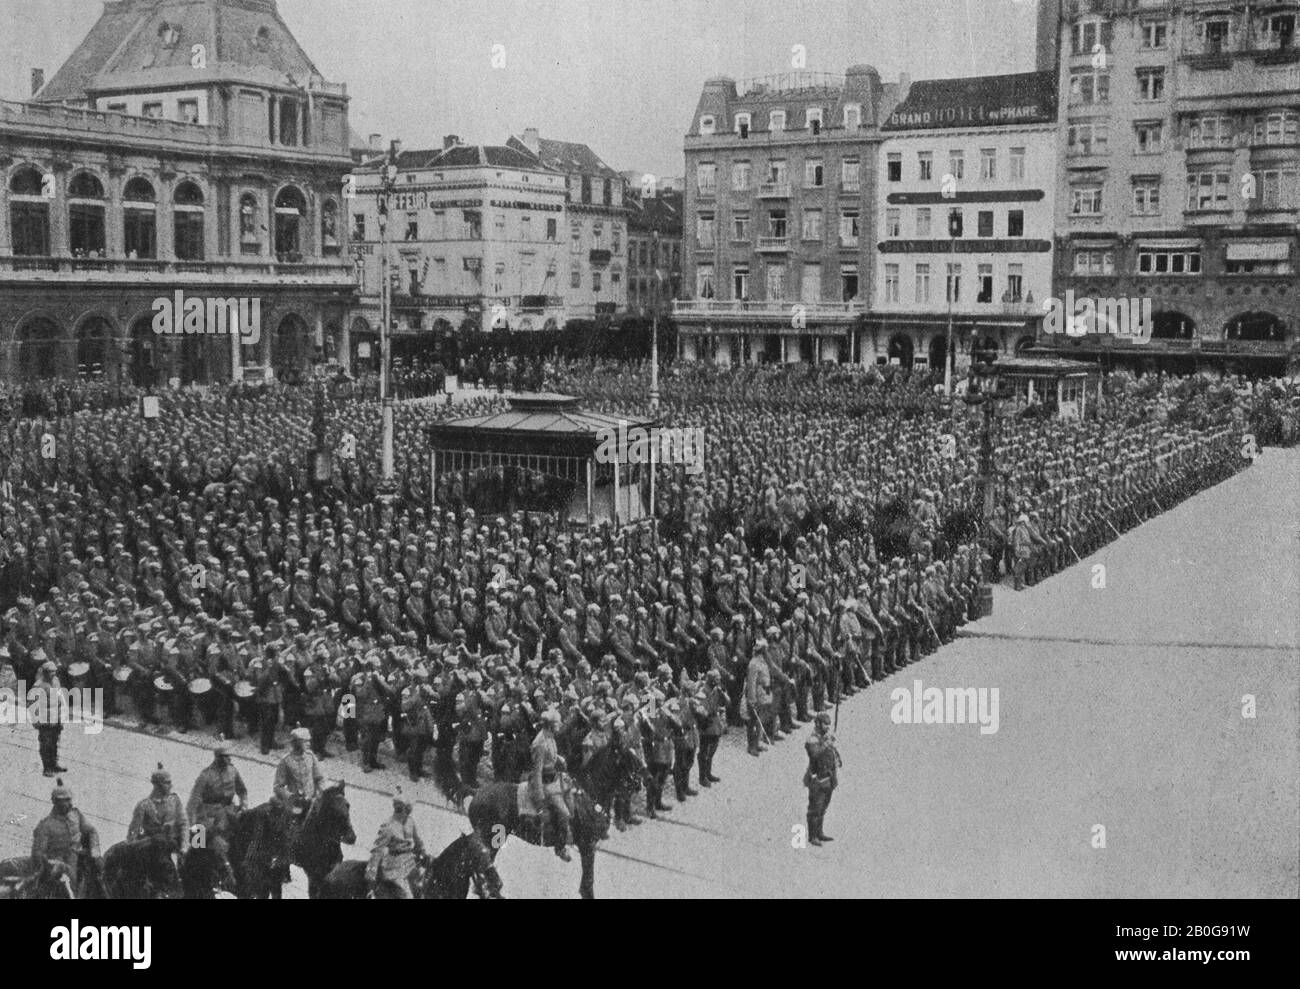 The occupation of Brussels in Belgium in August 1914 by German troops during World War One symbolised by a parade of soldiers in the Place du Marche Stock Photo